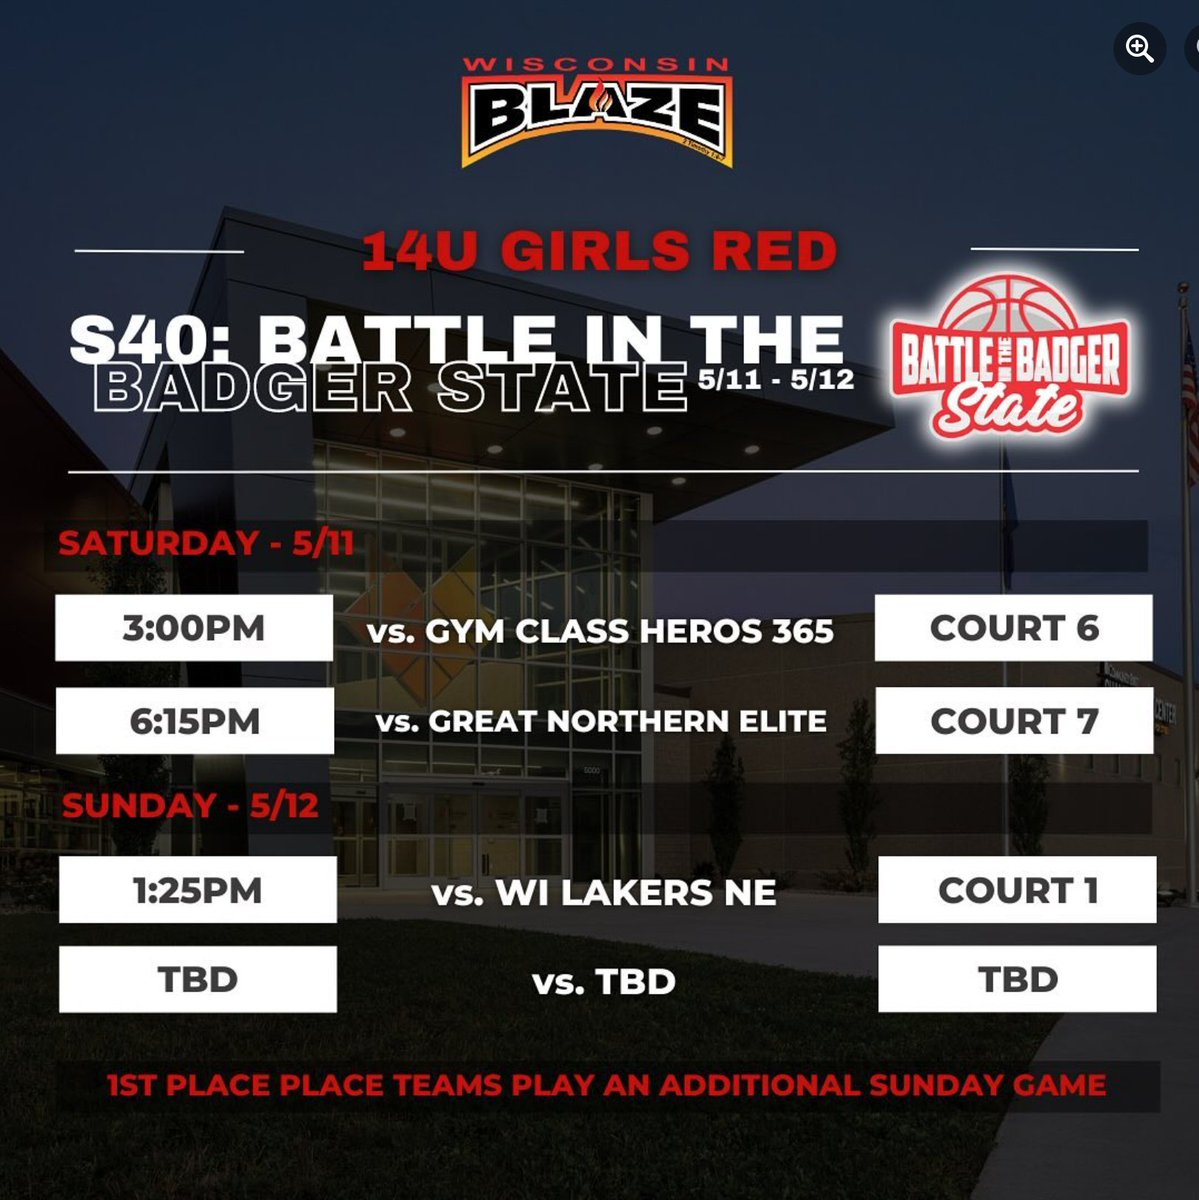 Here is a look at our girls teams' schedules for the Select 40 Battle in the Badger State and Let it Rain Downpour Invitational tourneys! #wisconsinblaze #betheflame🔥🏀